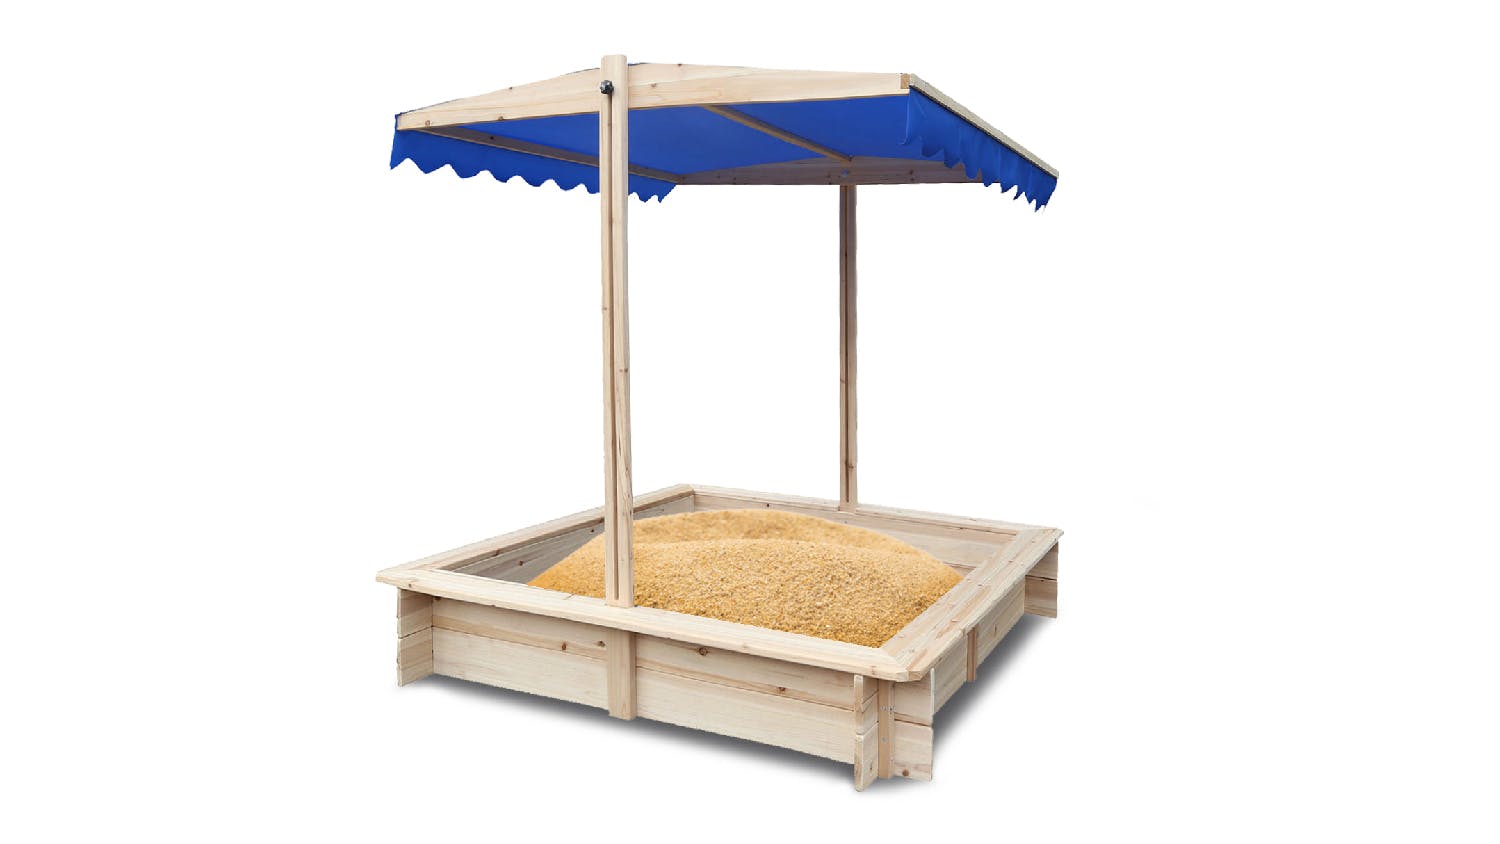 TSB Living Wooden Sandpit with Canopy